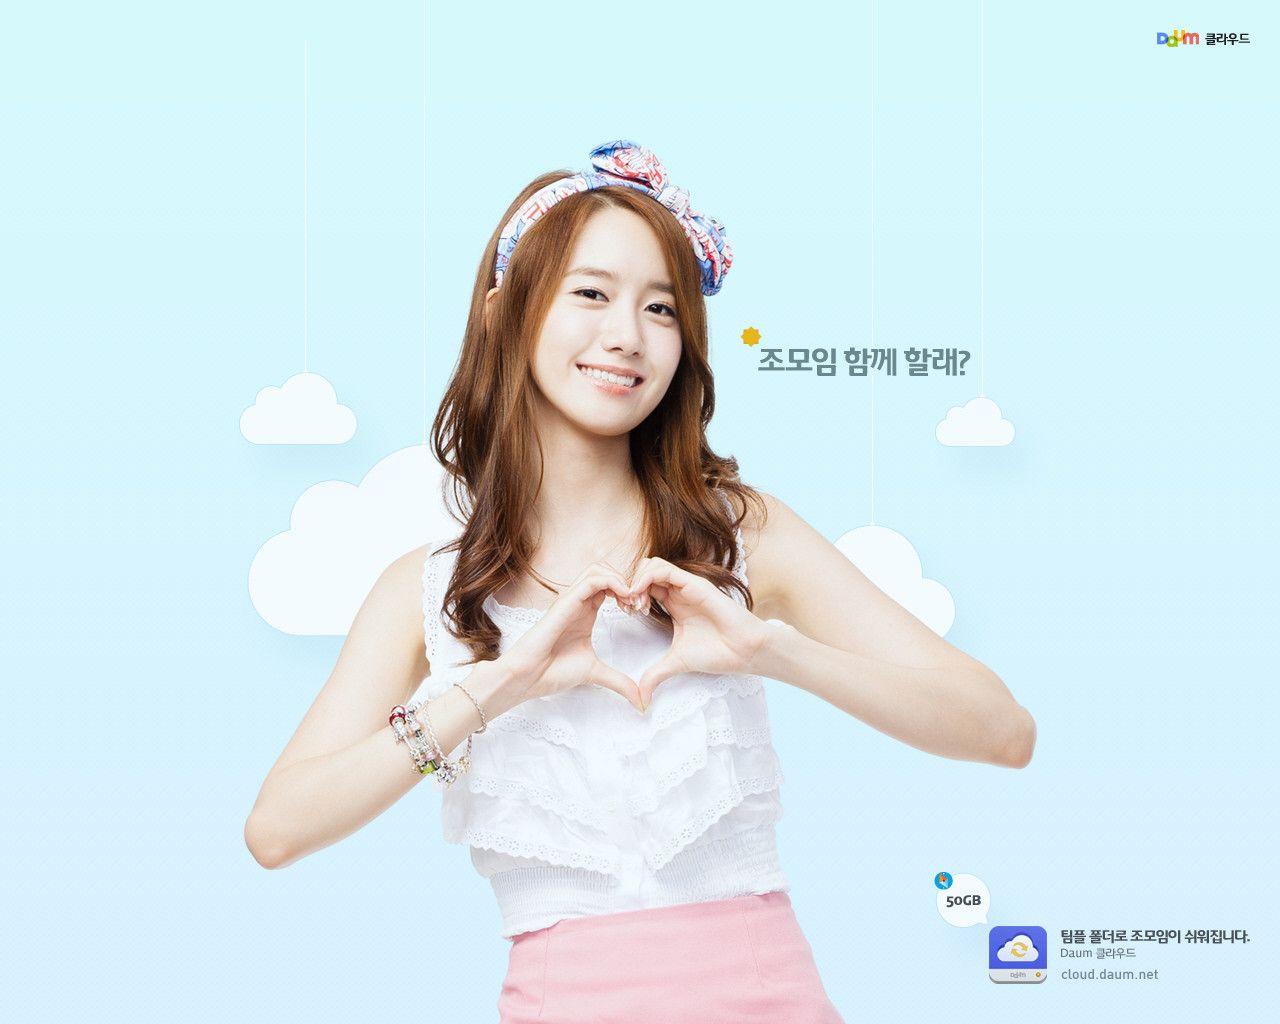 SNSD&;s Yuri and Yoona looking cute and chic for Daum Cloud